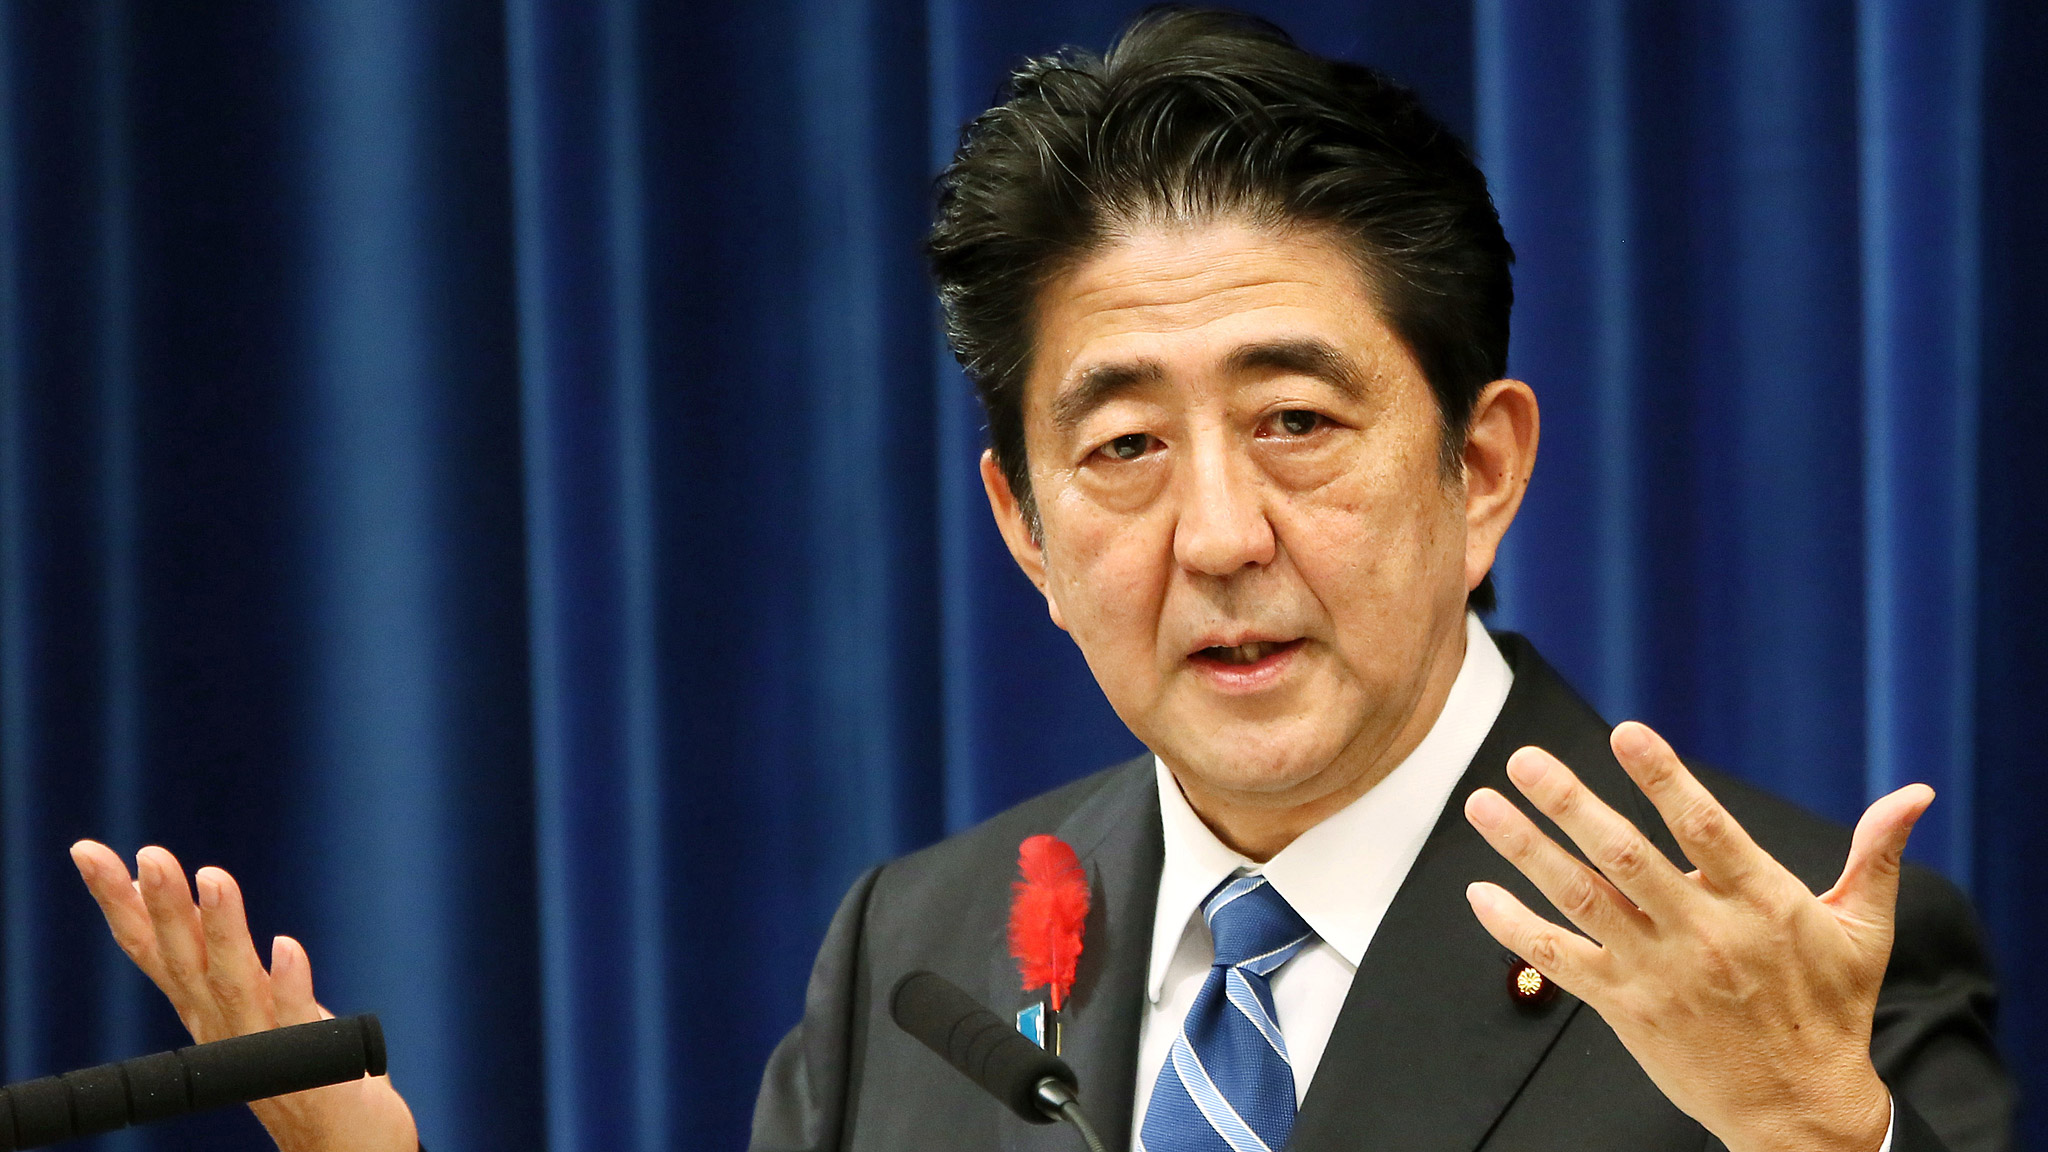 Abe's Biggest Rival to Run Japan May Come From His Own Party